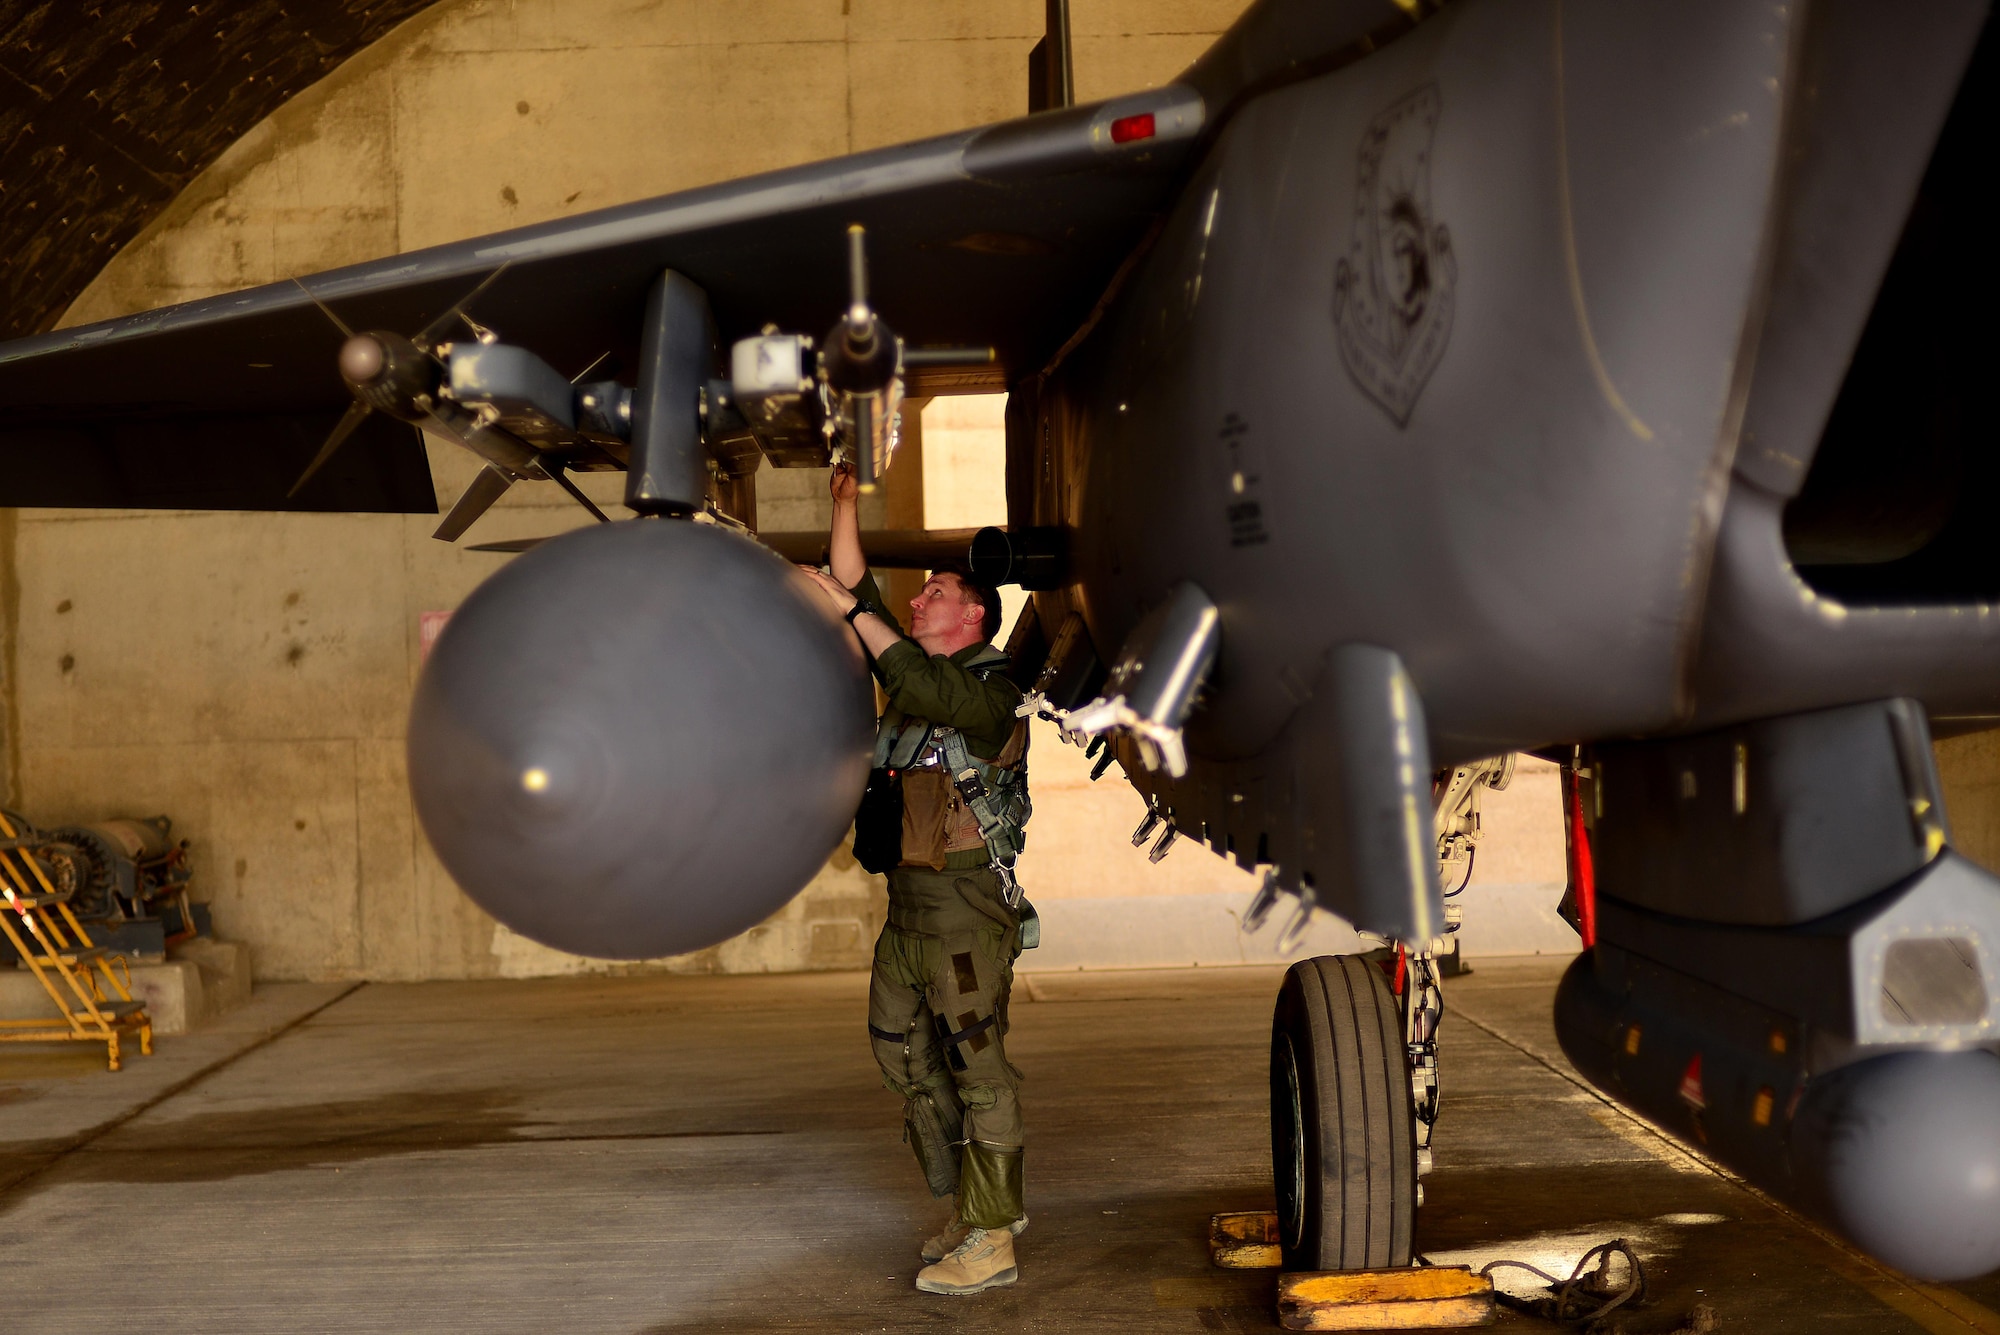 U.S. Air Force Colonel Evan Pettus, 48th Fighter Wing commander, Royal Air Force Lakenheath, England, conducts a pre-flight inspection of his F-15E Strike Eagle in support of exercise Juniper Falcon May 8, at Uvda Air Base, Israel. Pettus flew a training sortie with Israeli air force designed to improve interoperability between U.S. and Israeli air capabilities. (U.S. Air Force photo/ Tech. Sgt. Matthew Plew)